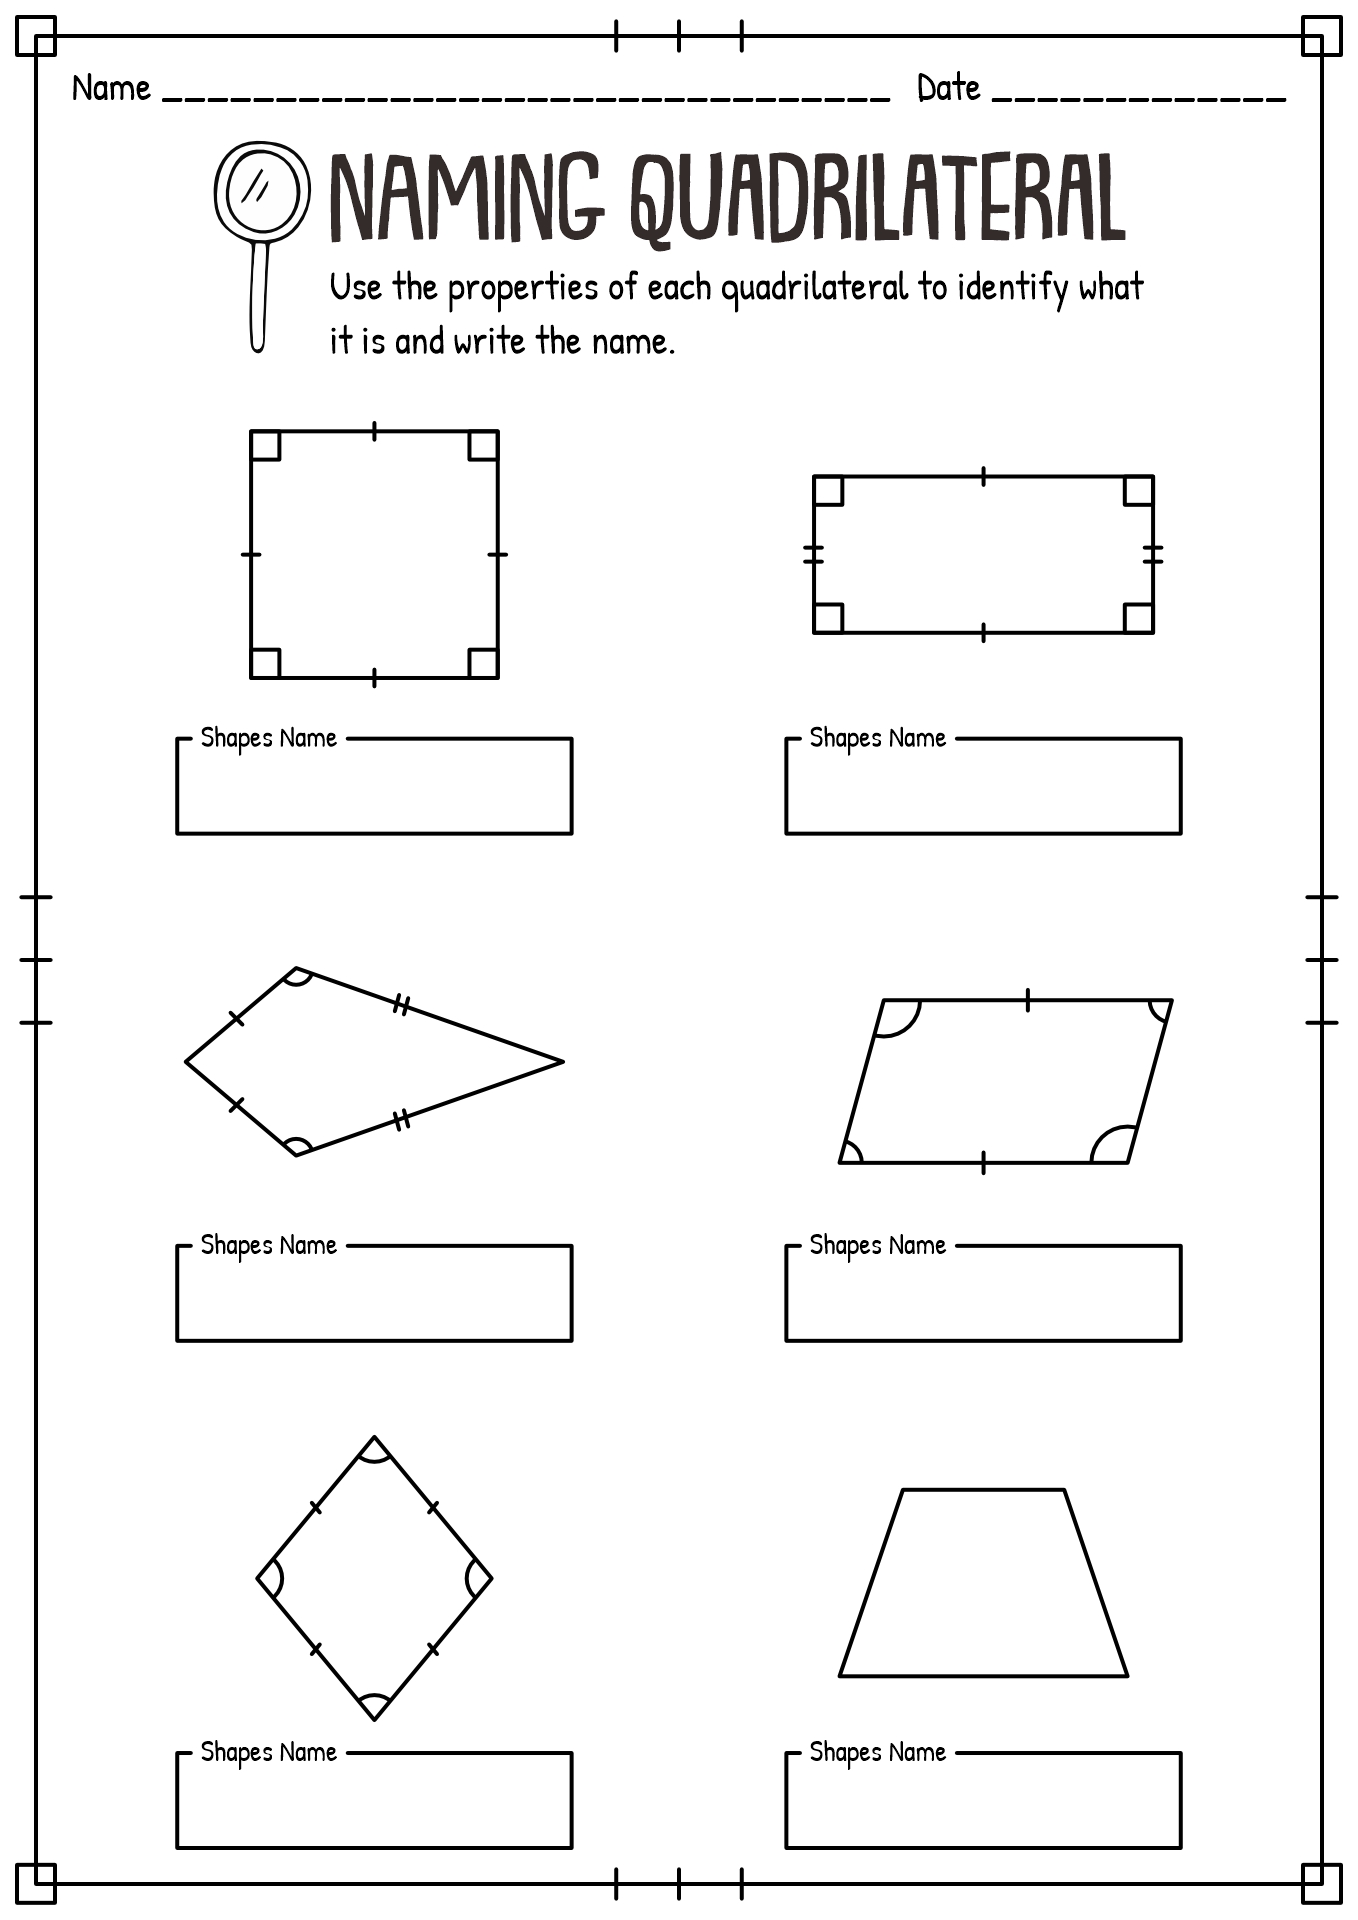 Worksheet Quadrilateral Shapes and Names